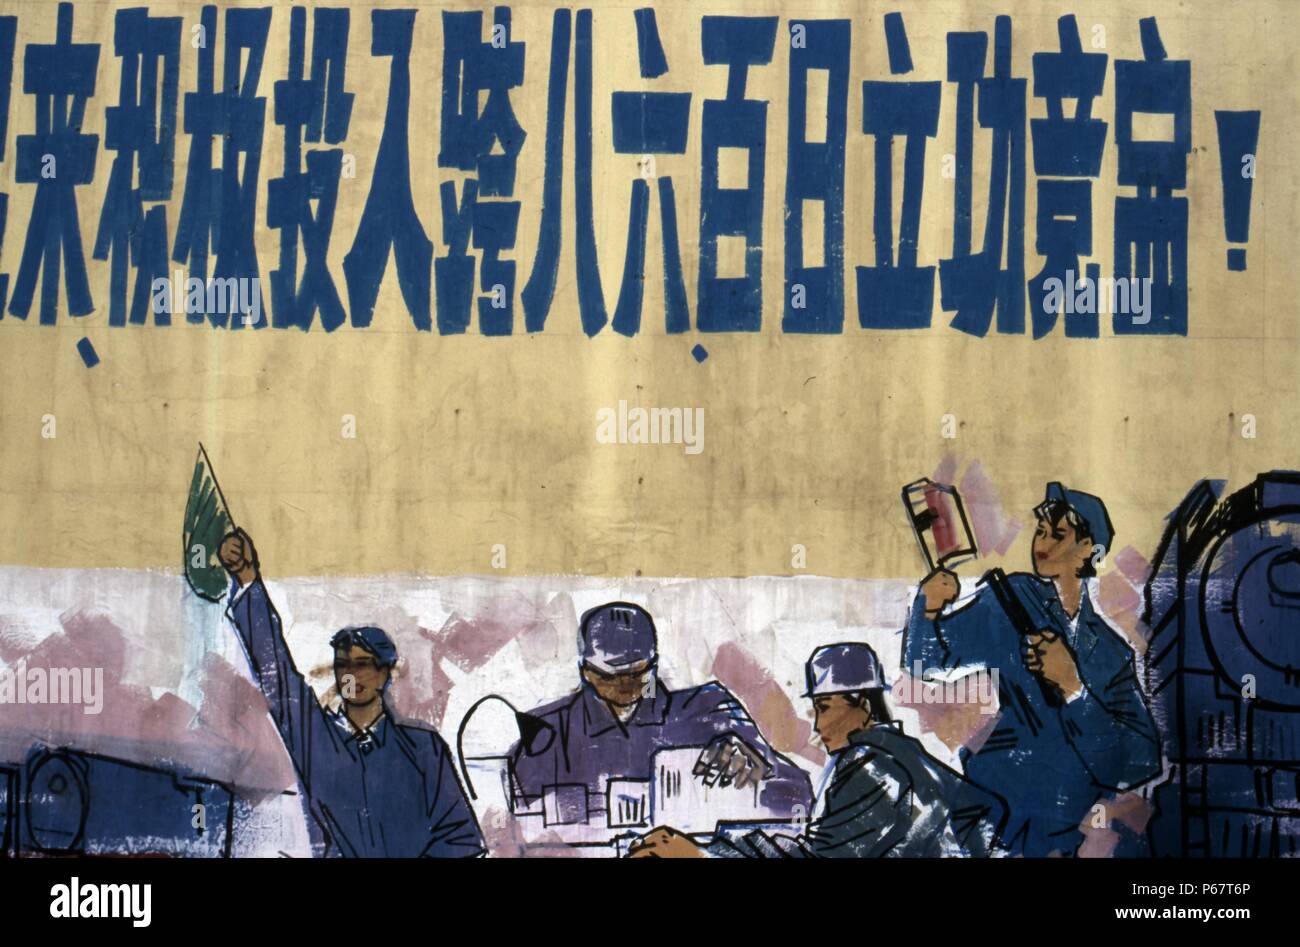 Productivity slogans and related artwork at China's Datong Locomotive Works. Stock Photo